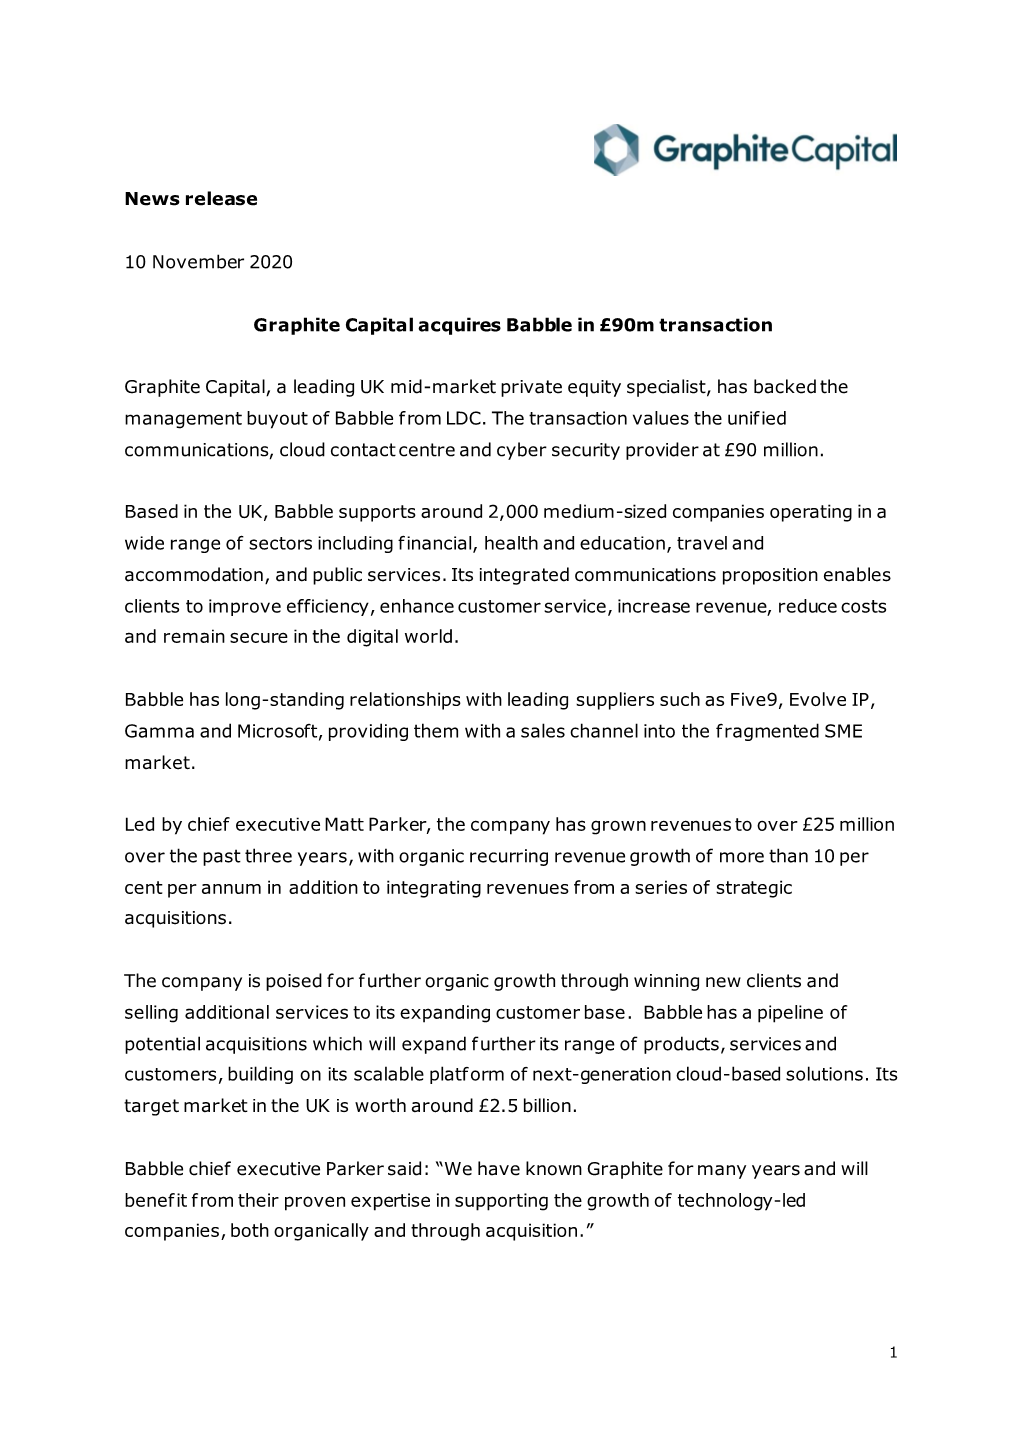 News Release 10 November 2020 Graphite Capital Acquires Babble In